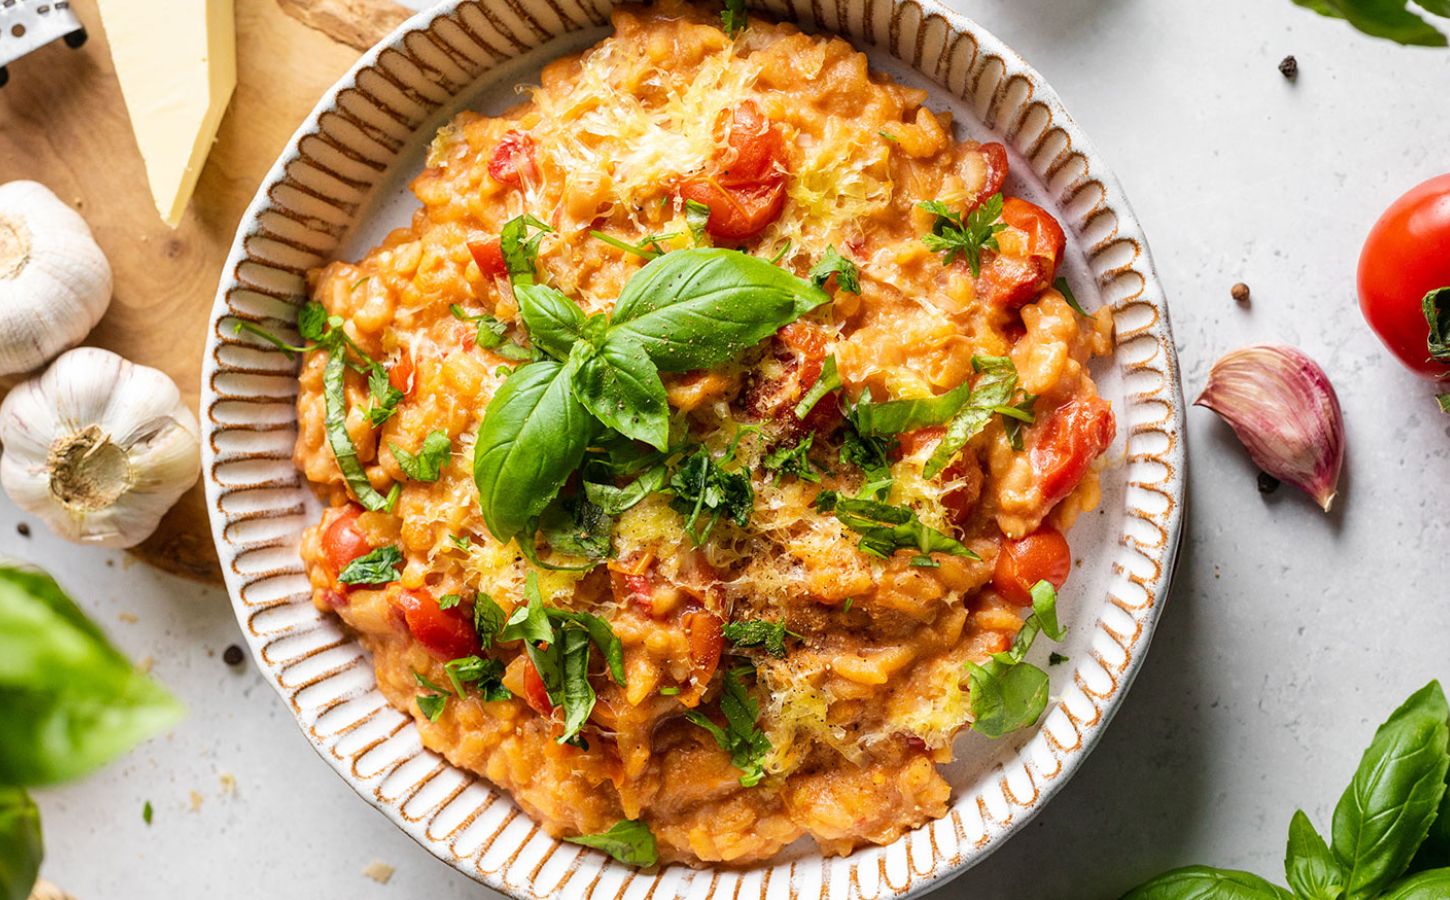 A bowl of vegan cherry tomato risotto made to a dairy-free and plant-based recipe